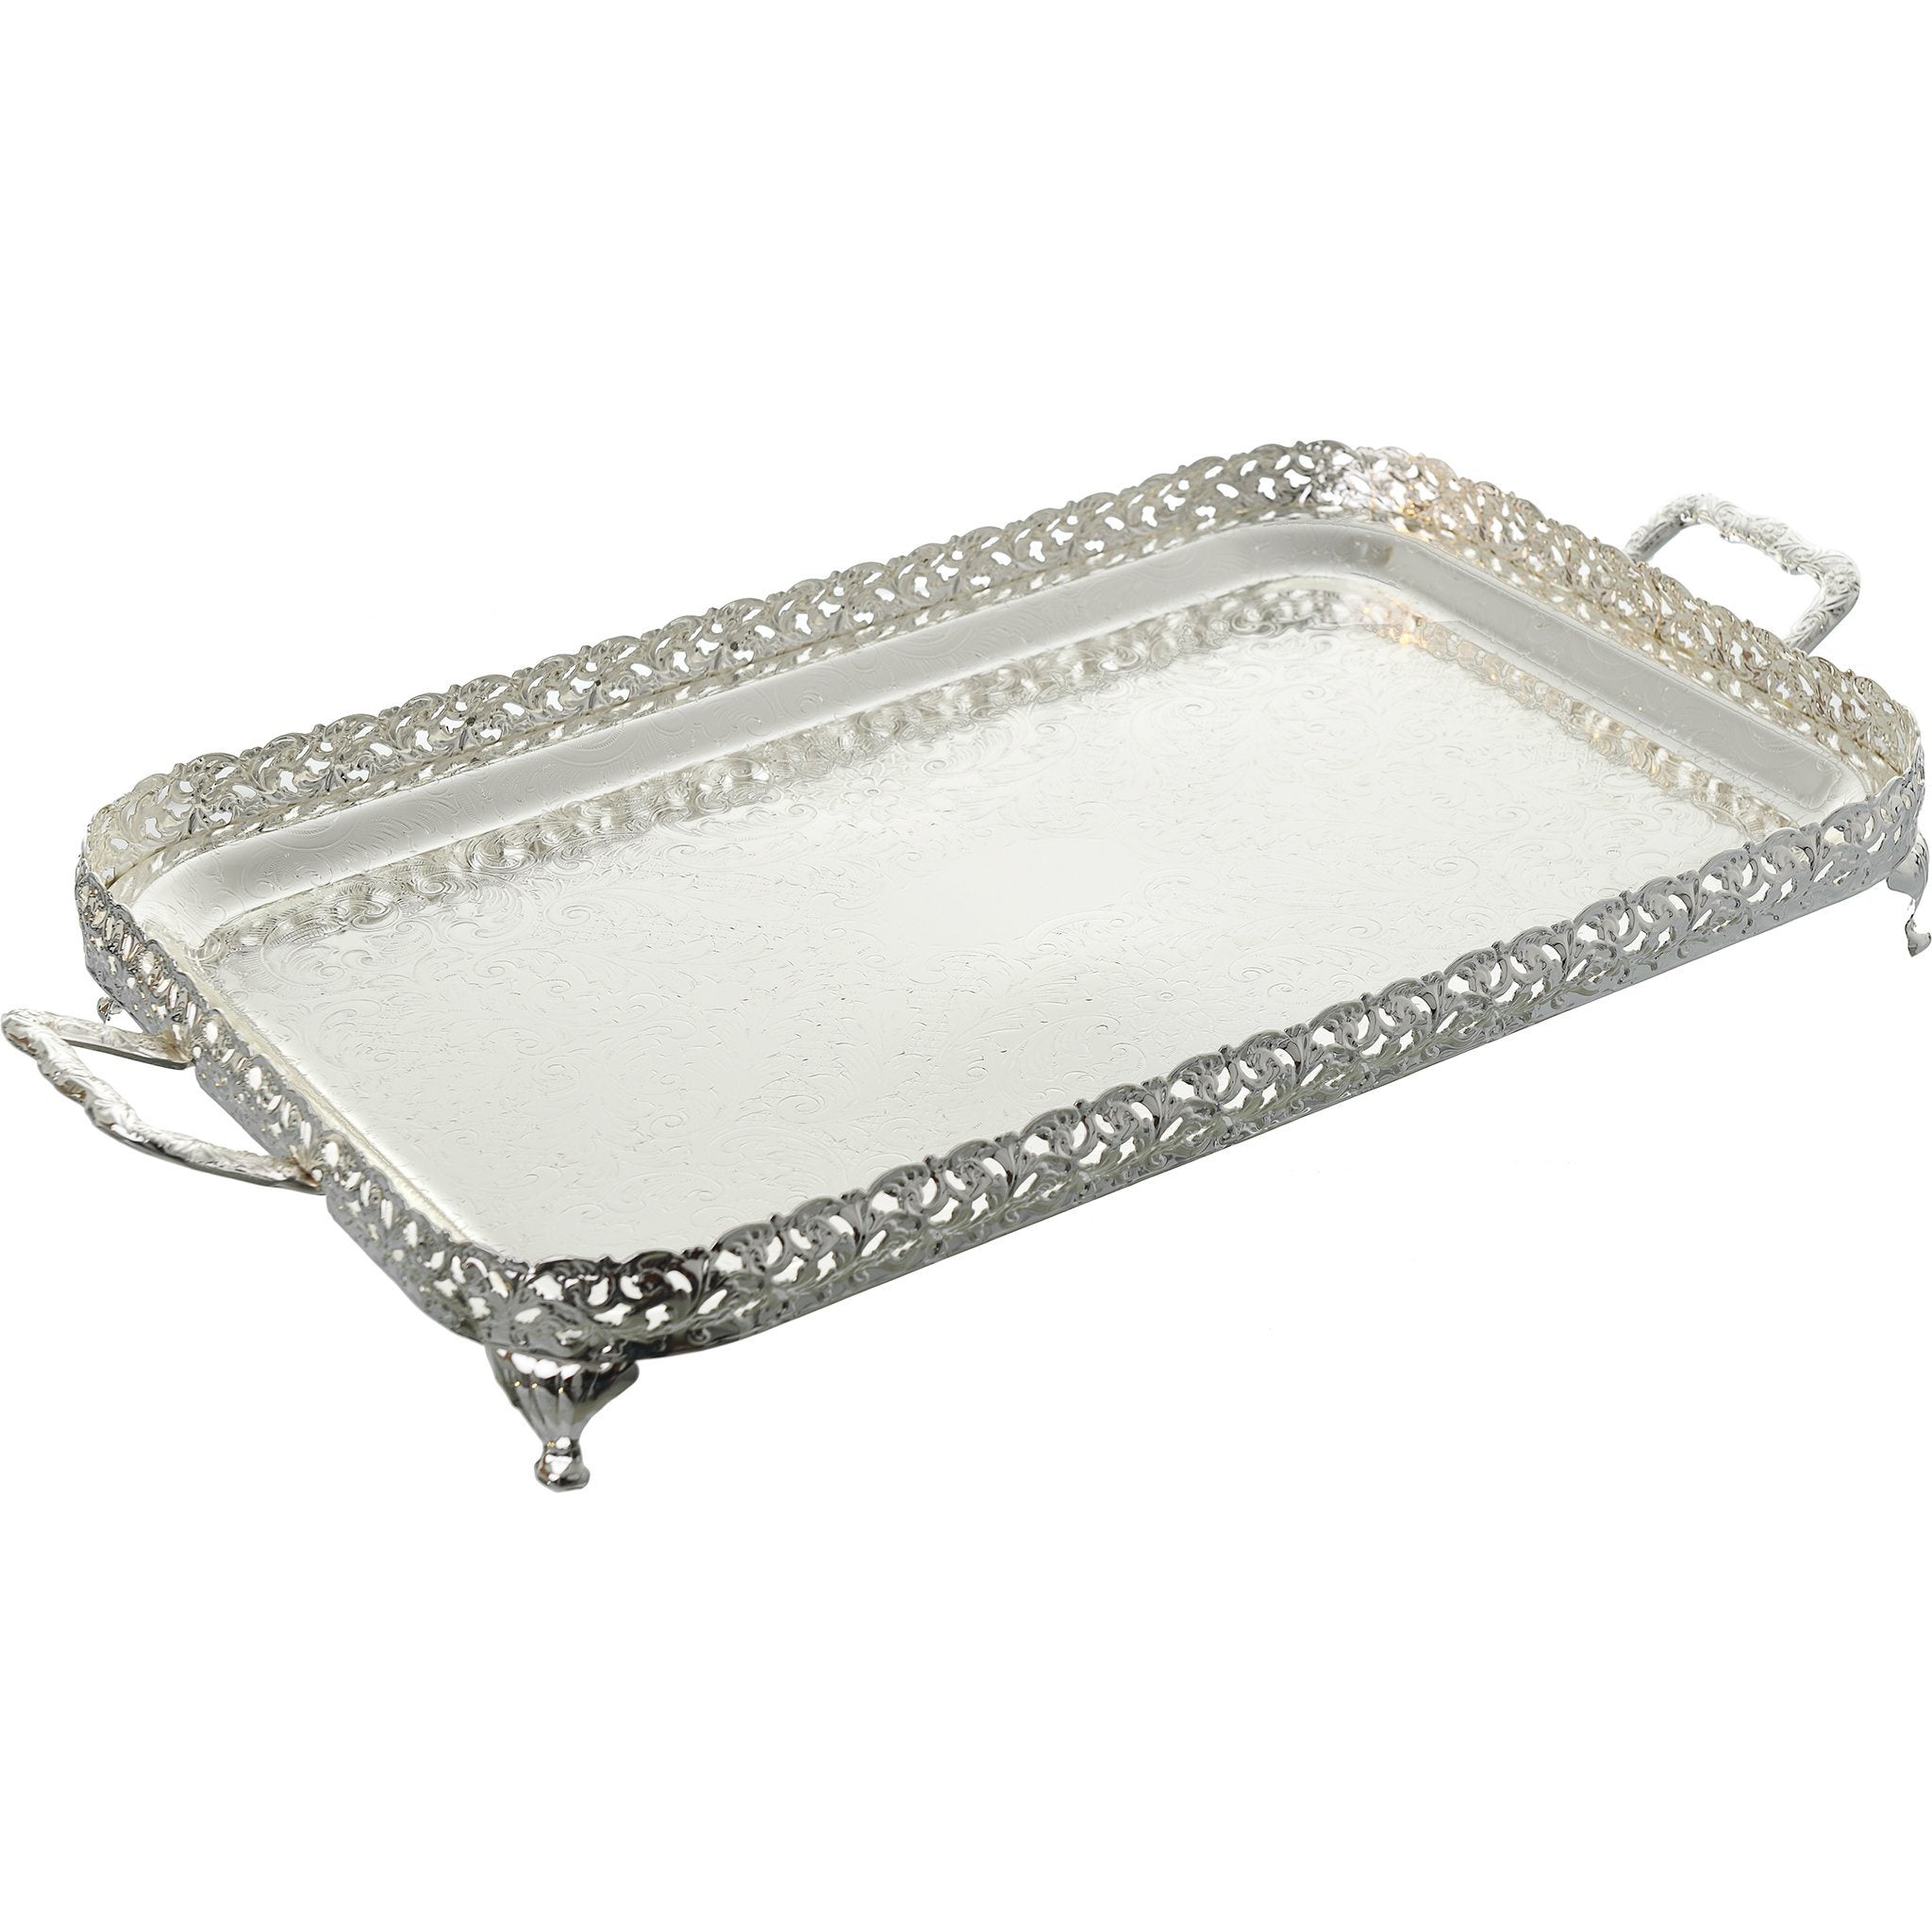 Queen Anne - Rectangular Tray with Handles & Legs - Silver Plated Metal - 62.5x34.5cm - 26000268